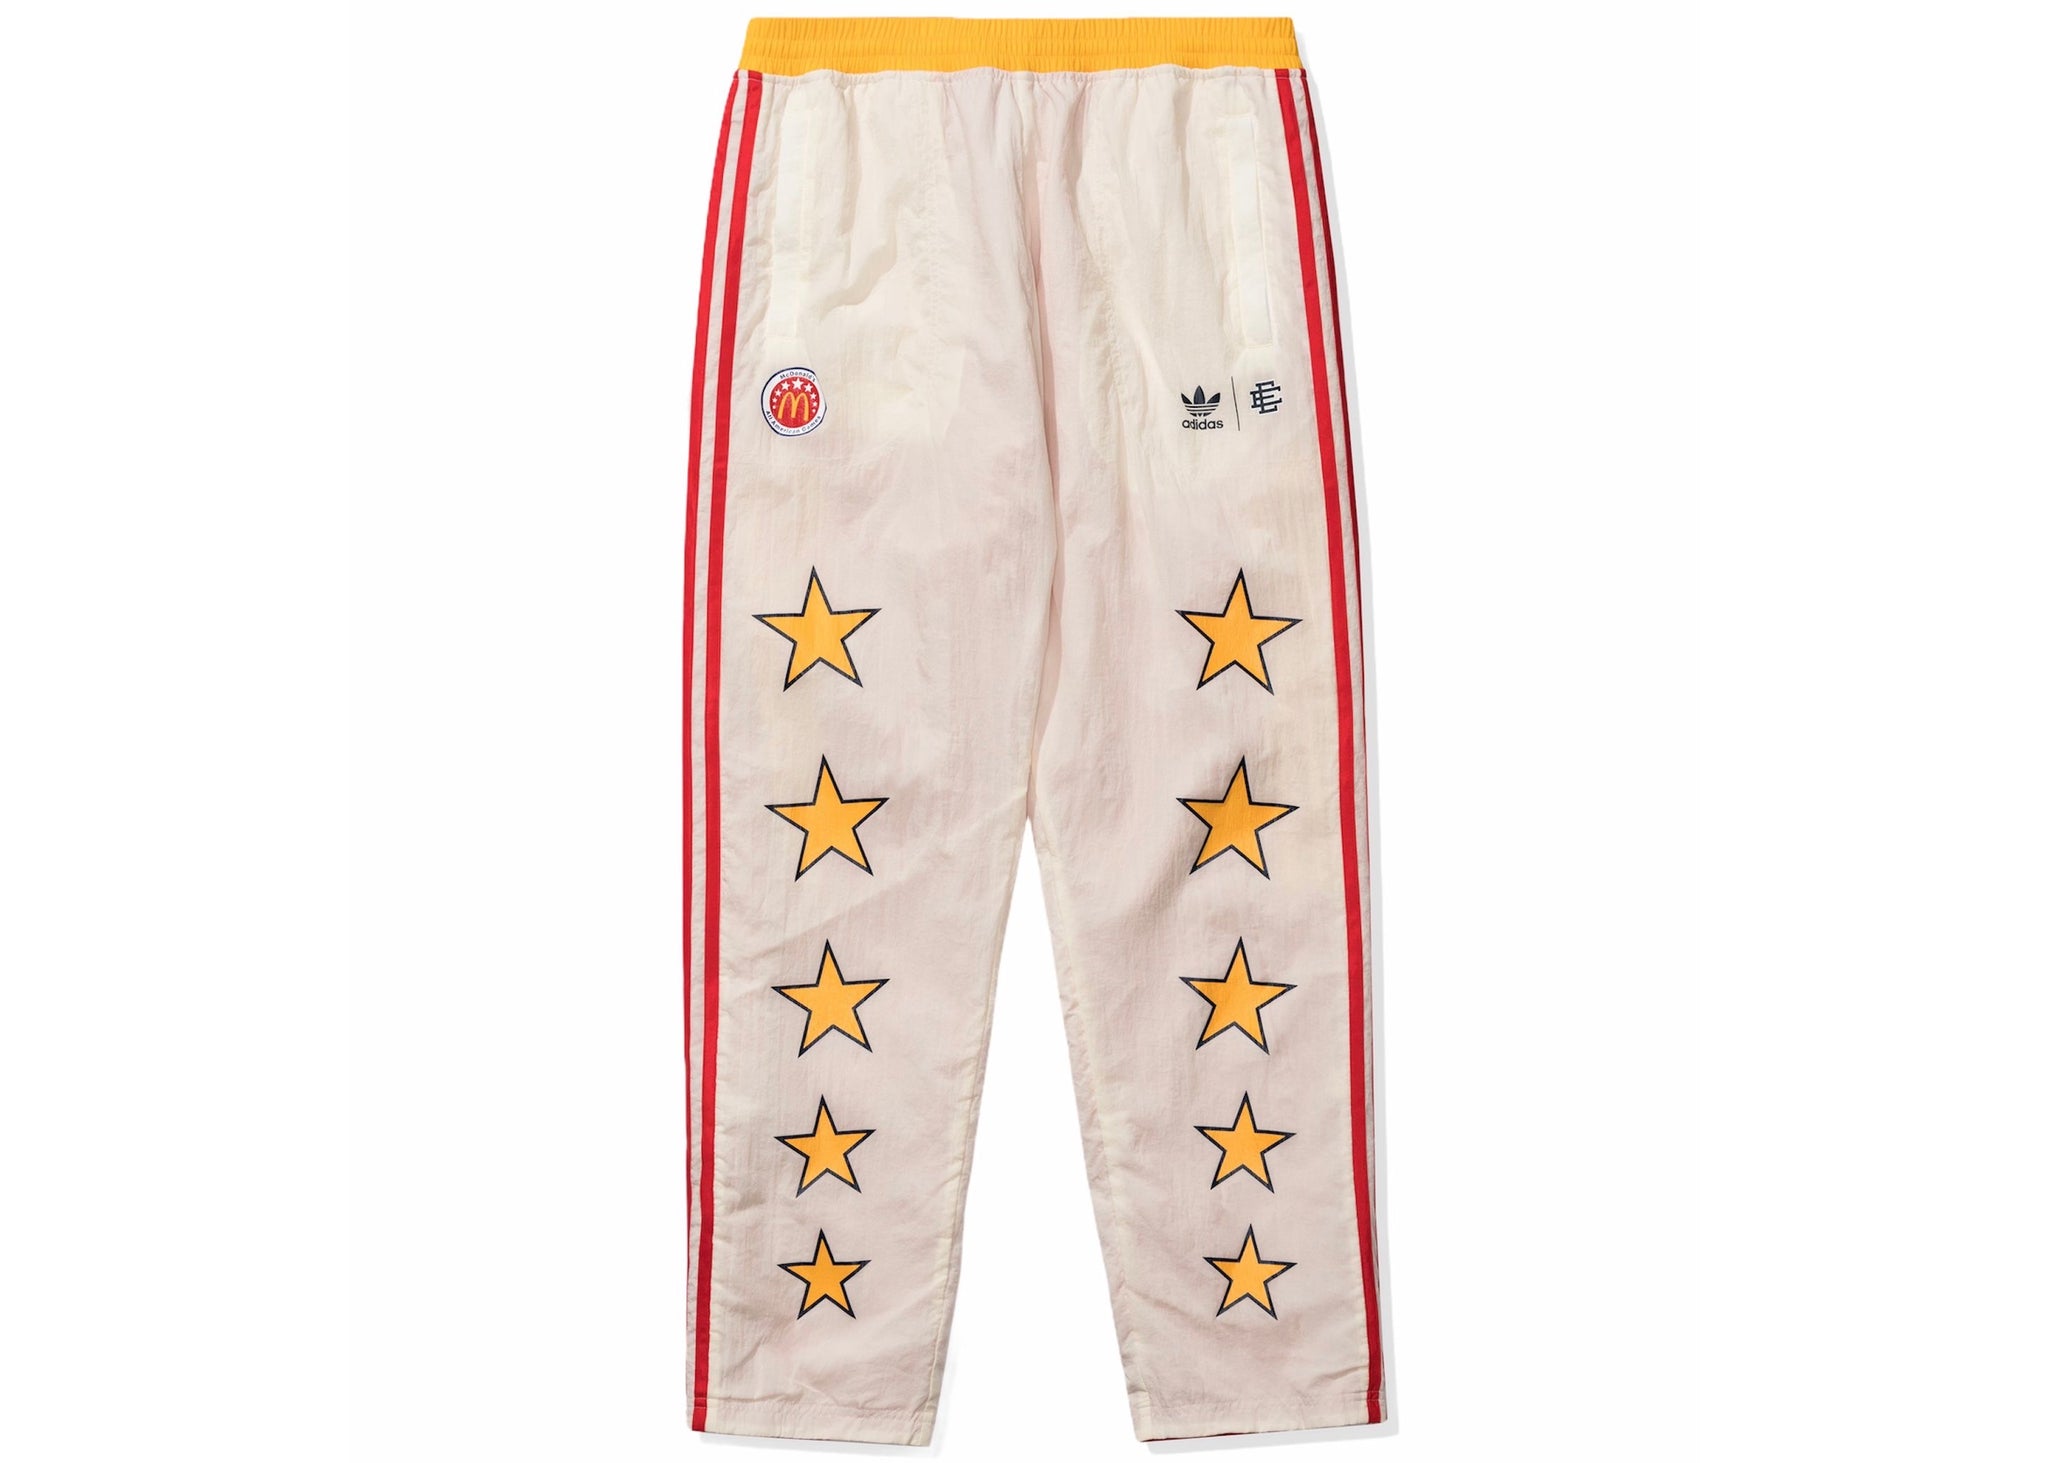 Adidas x Eric McDonald's All-American Reversible Track Pants “ – Piece and Sole